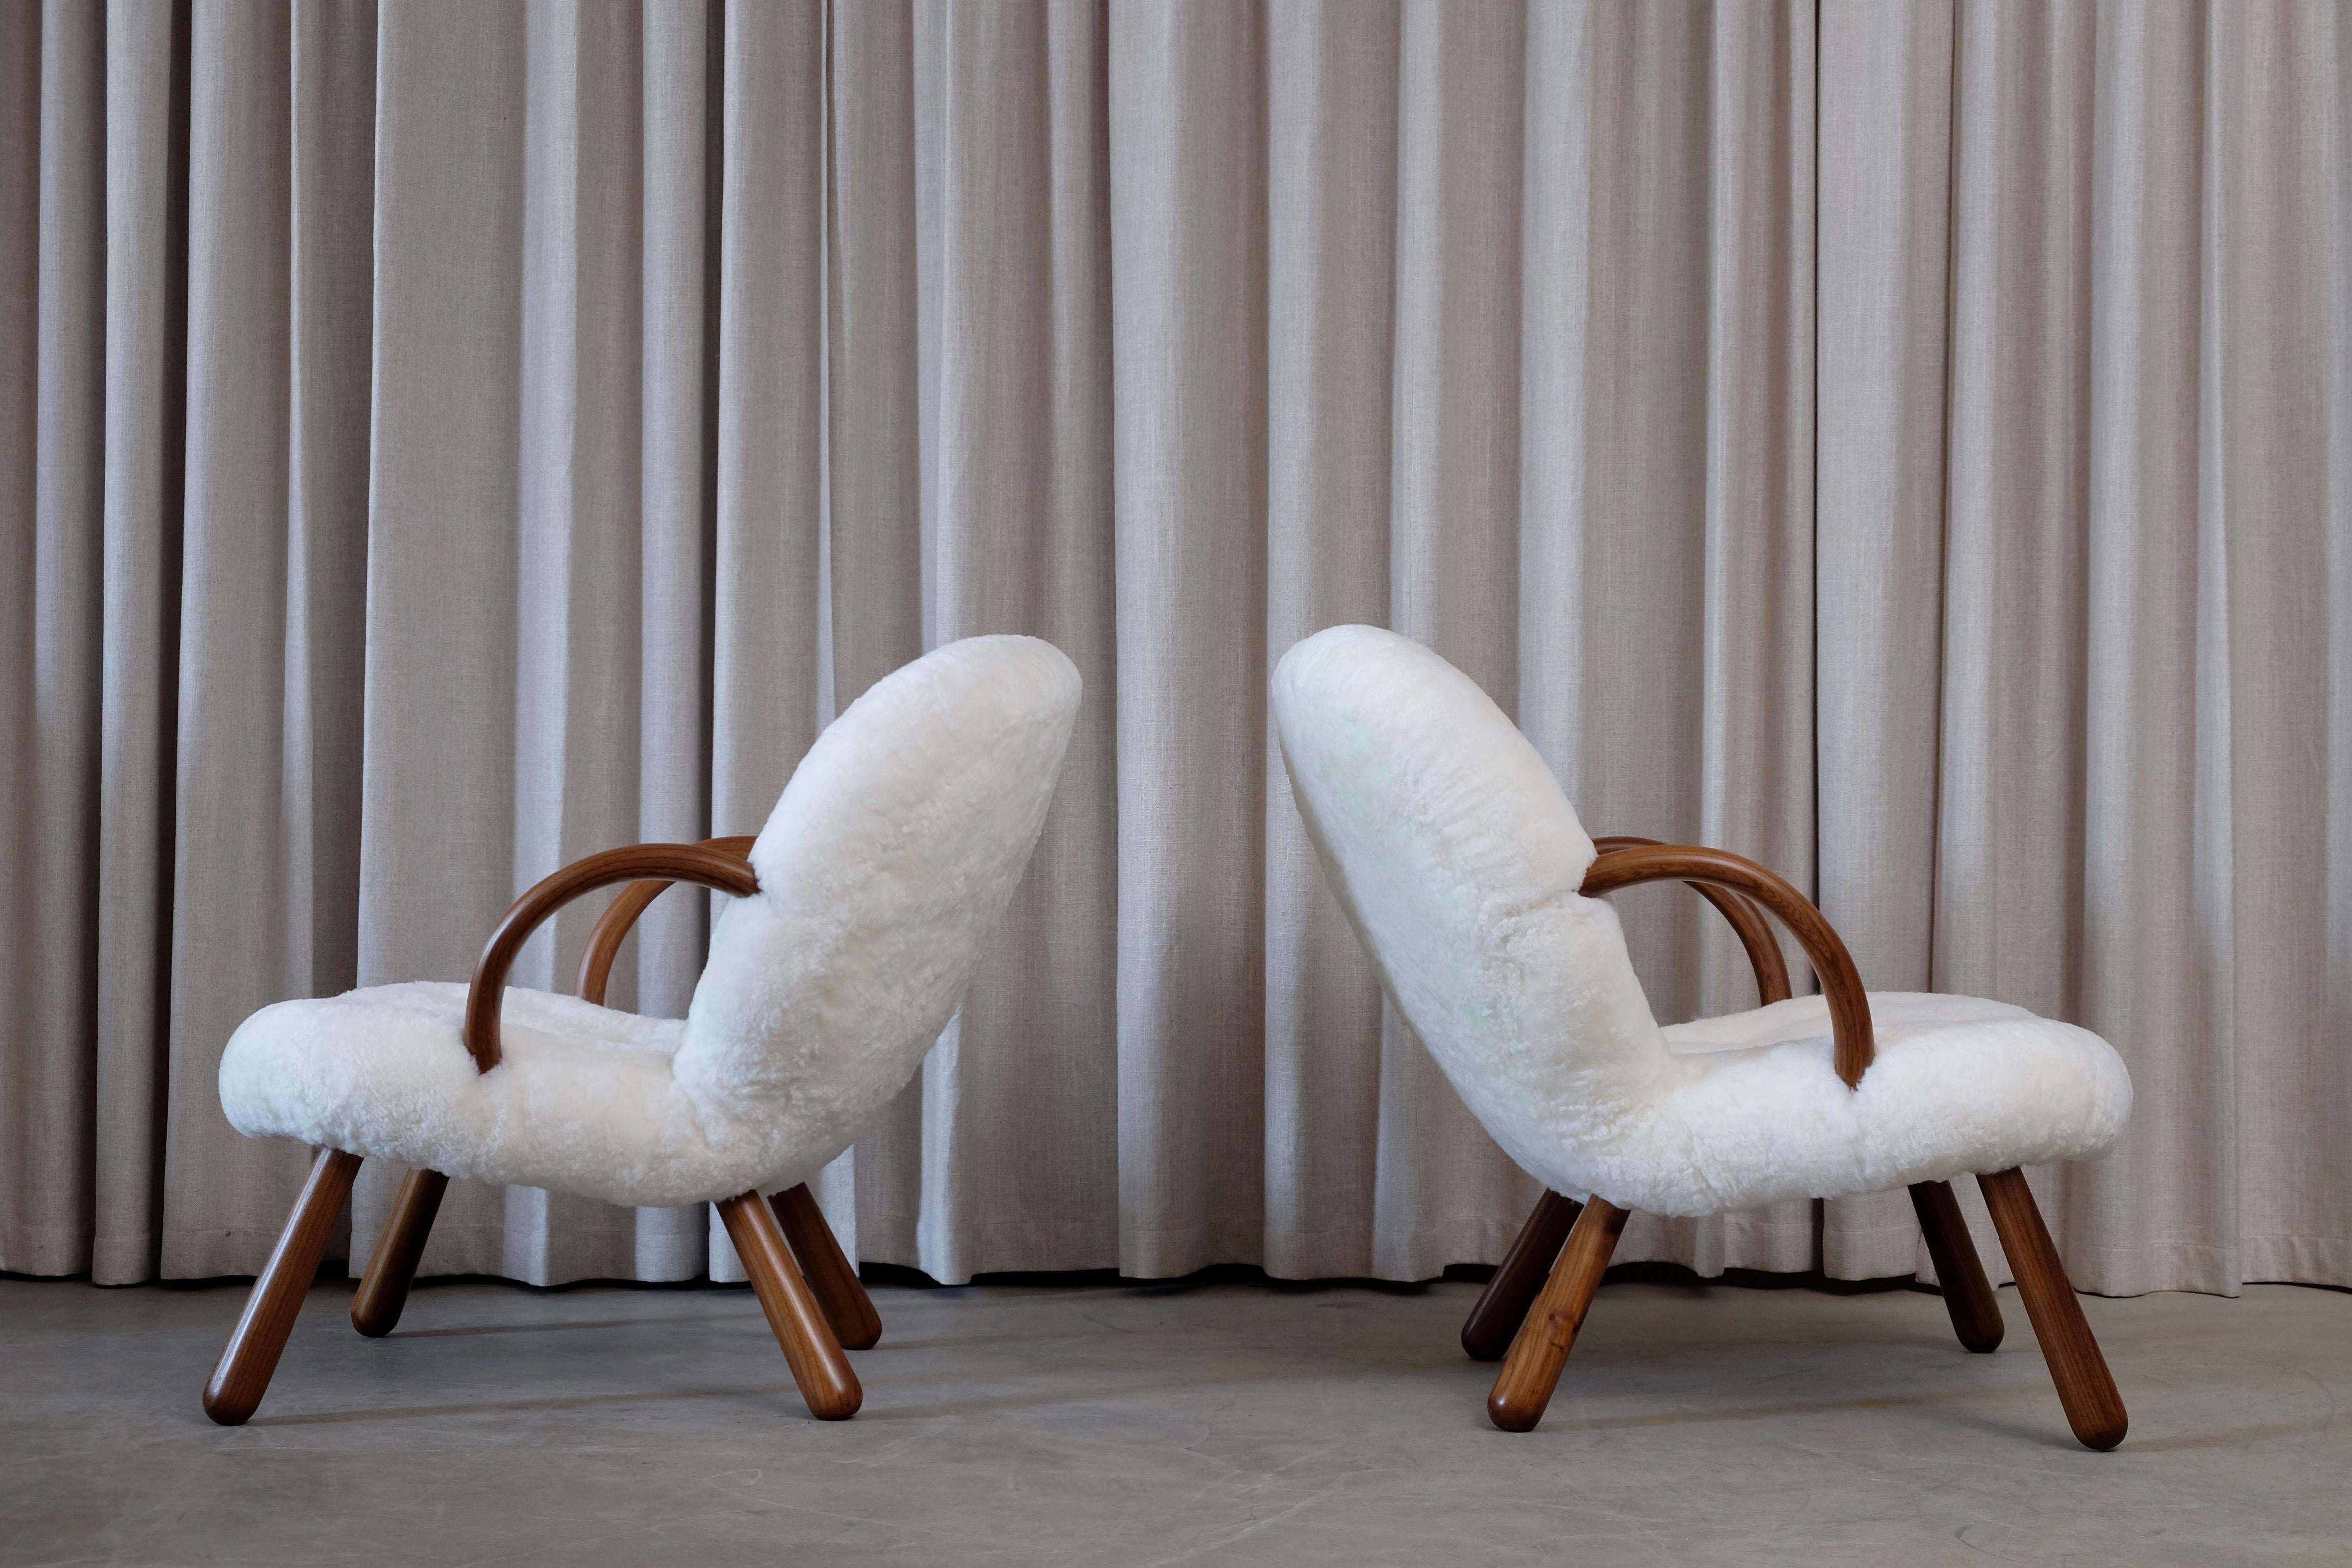 Sheepskin Philip Arctander Clam Chairs by Nordisk Stål & Møbel Central in Denmark, 1940s